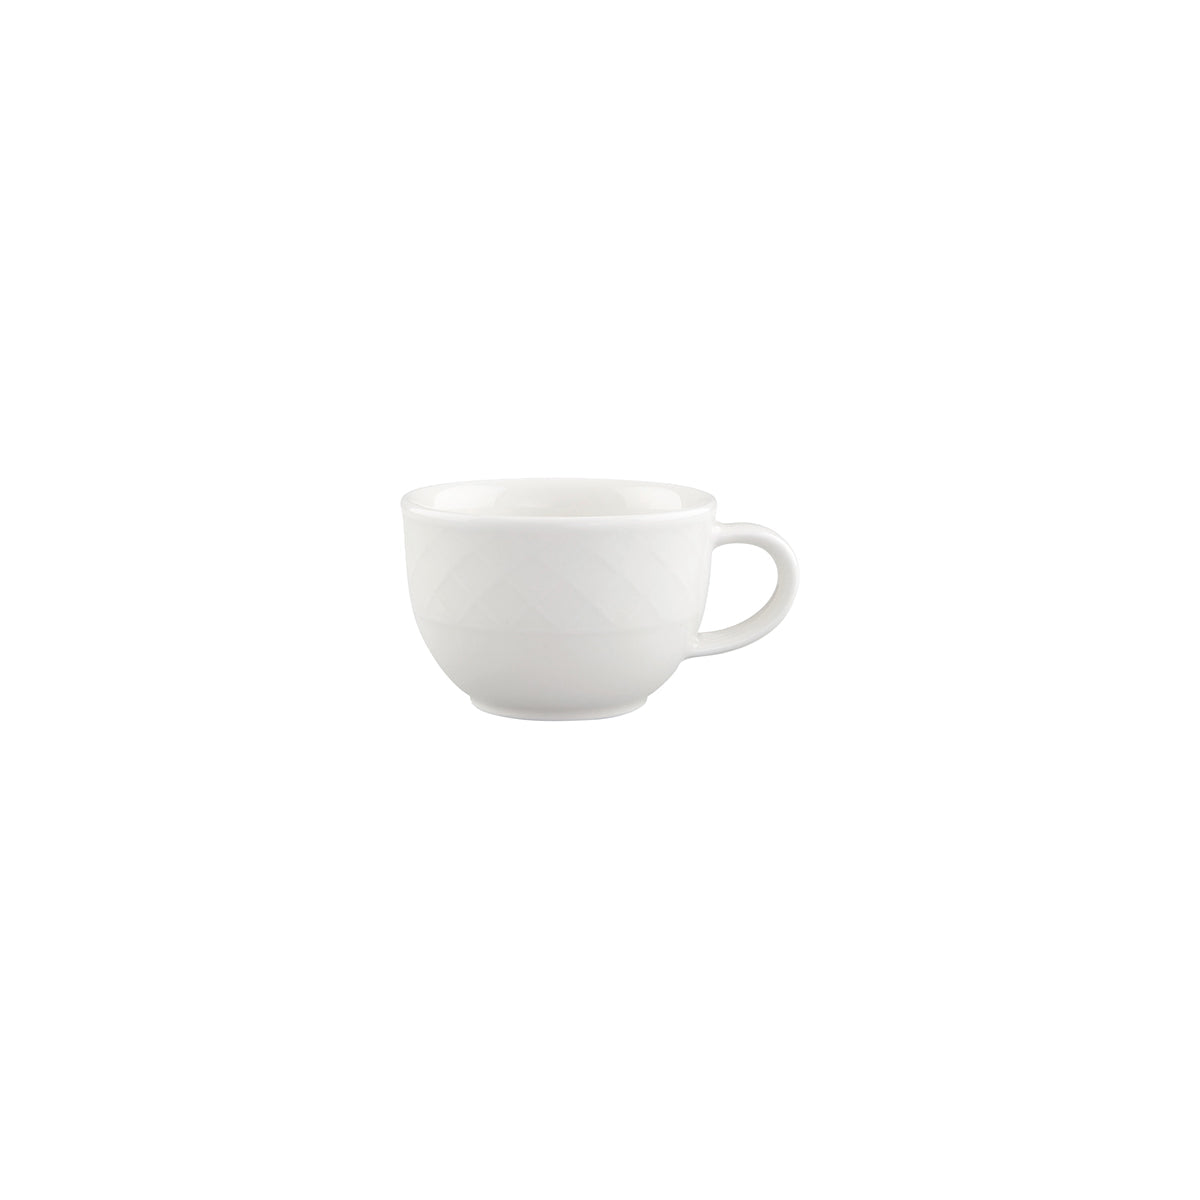 VB16-2238-1450 Villeroy And Boch Villeroy And Boch Bella White Cup No. 8 100ml Tomkin Australia Hospitality Supplies